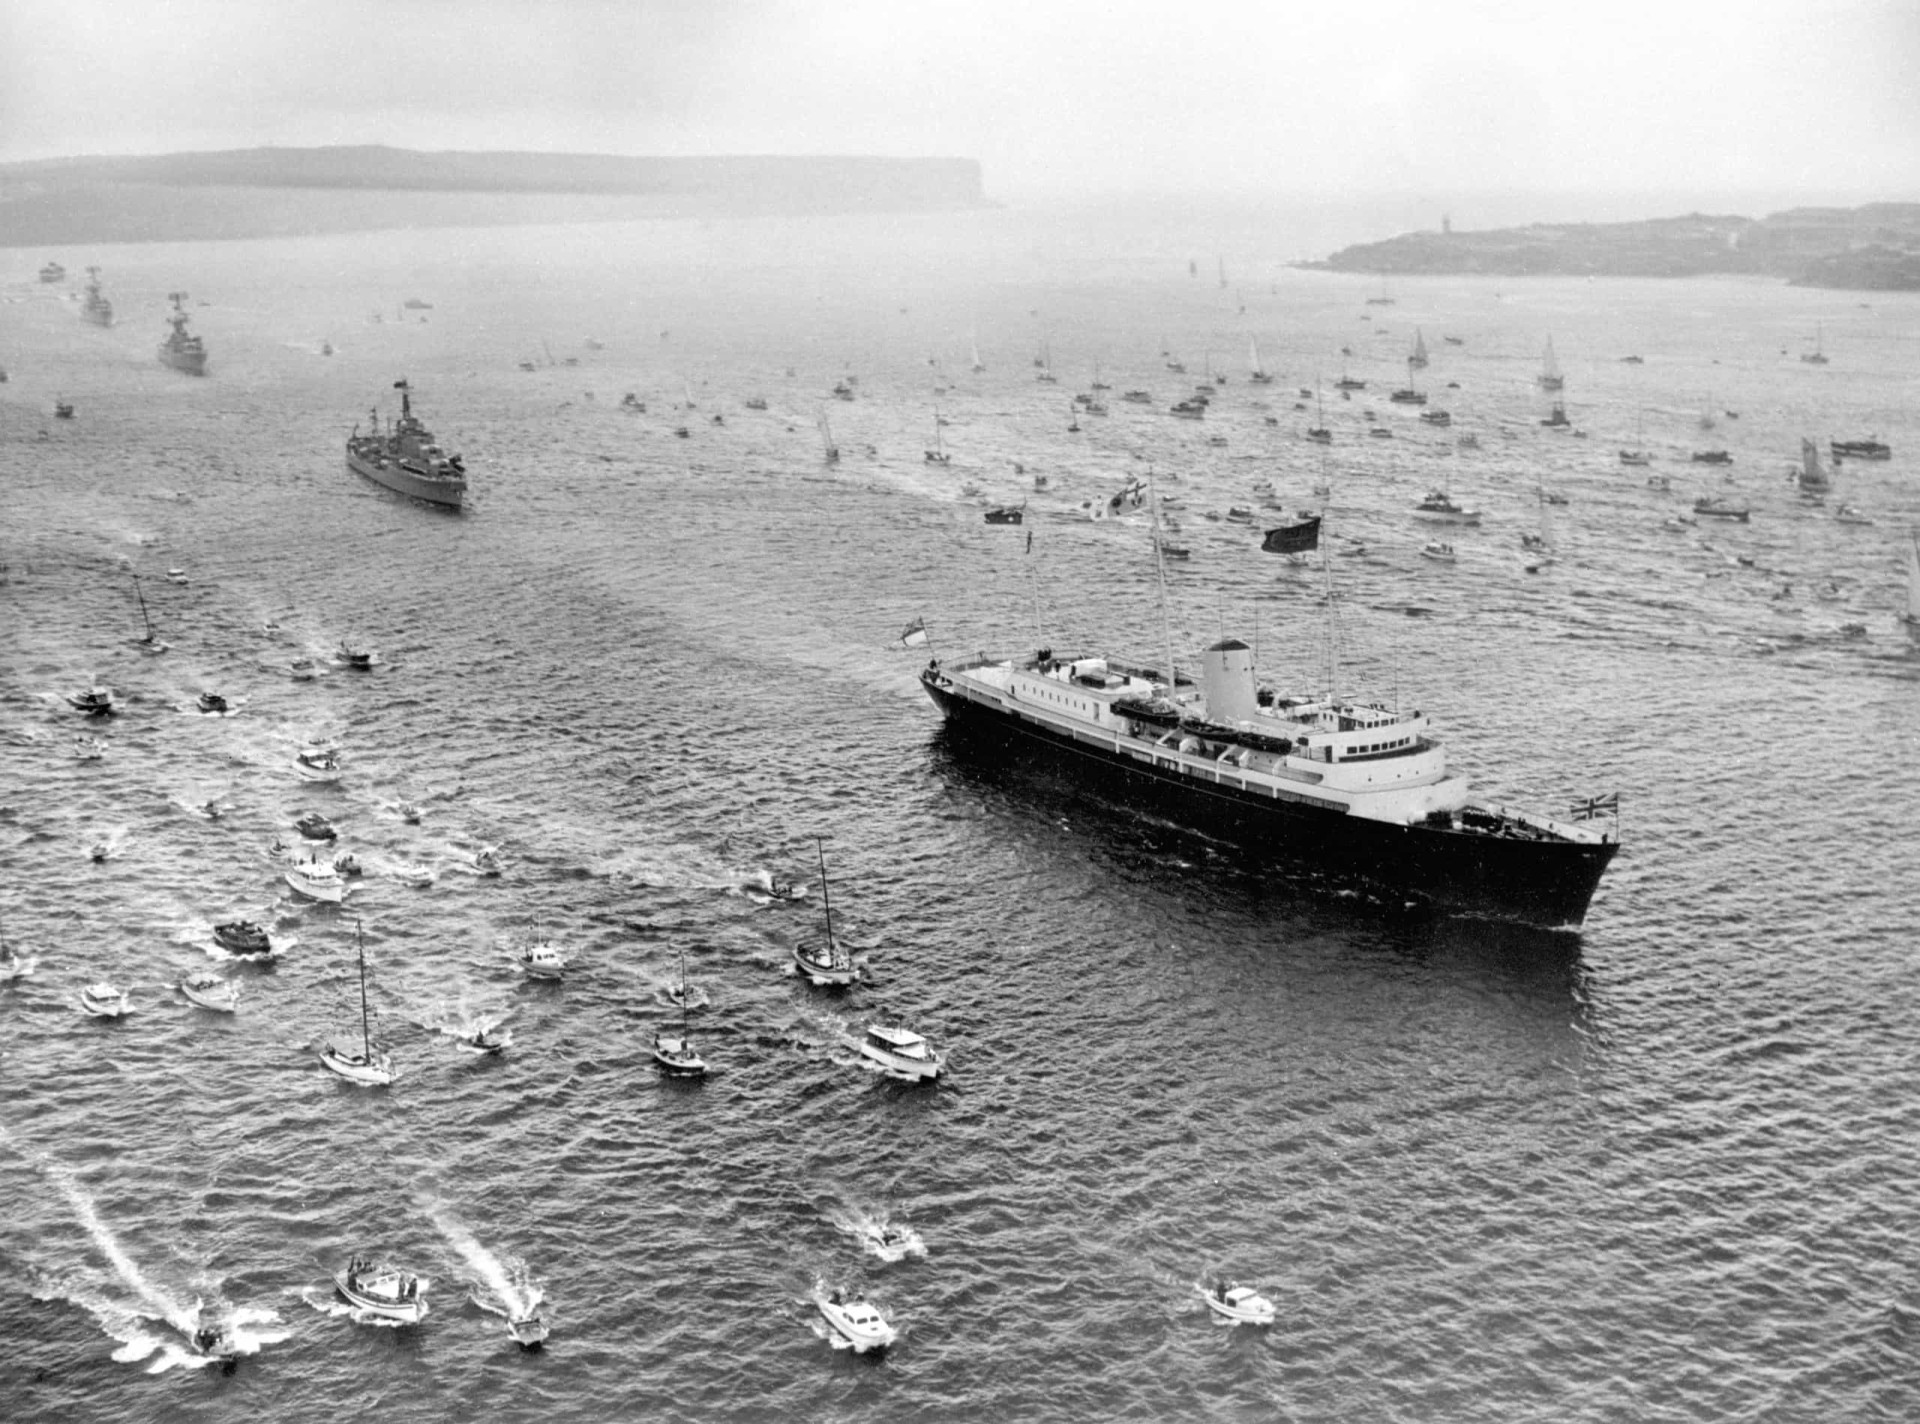 <p>Escorted by an armada of small craft, <em>Britannia</em>, bearing Queen Elizabeth II and the Duke of Edinburgh, arrives off Sydney Heads during their tour of Australia in 1963. Three escorting destroyers of the Royal Australian Navy follow in her wake.</p><p>You may also like:<a href="https://www.starsinsider.com/n/291814?utm_source=msn.com&utm_medium=display&utm_campaign=referral_description&utm_content=474709v1en-us"> Social situations that introverts dread</a></p>